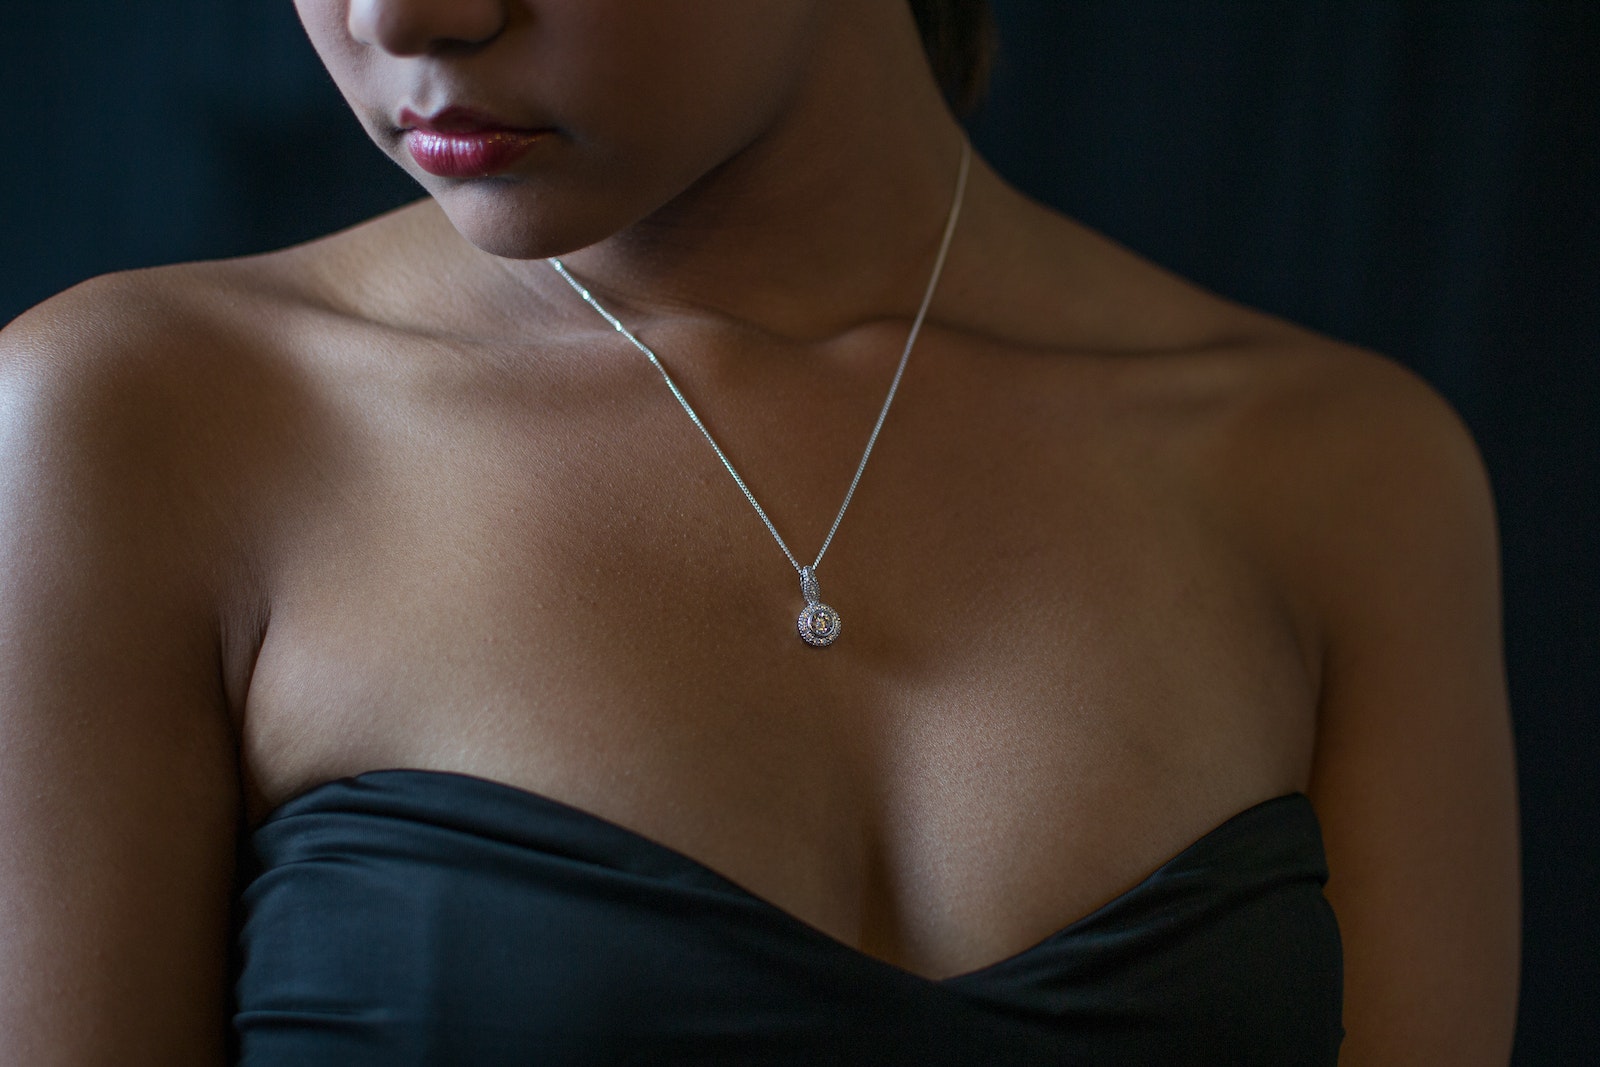 Woman in Black Strapless Top Wearing Gold Necklace